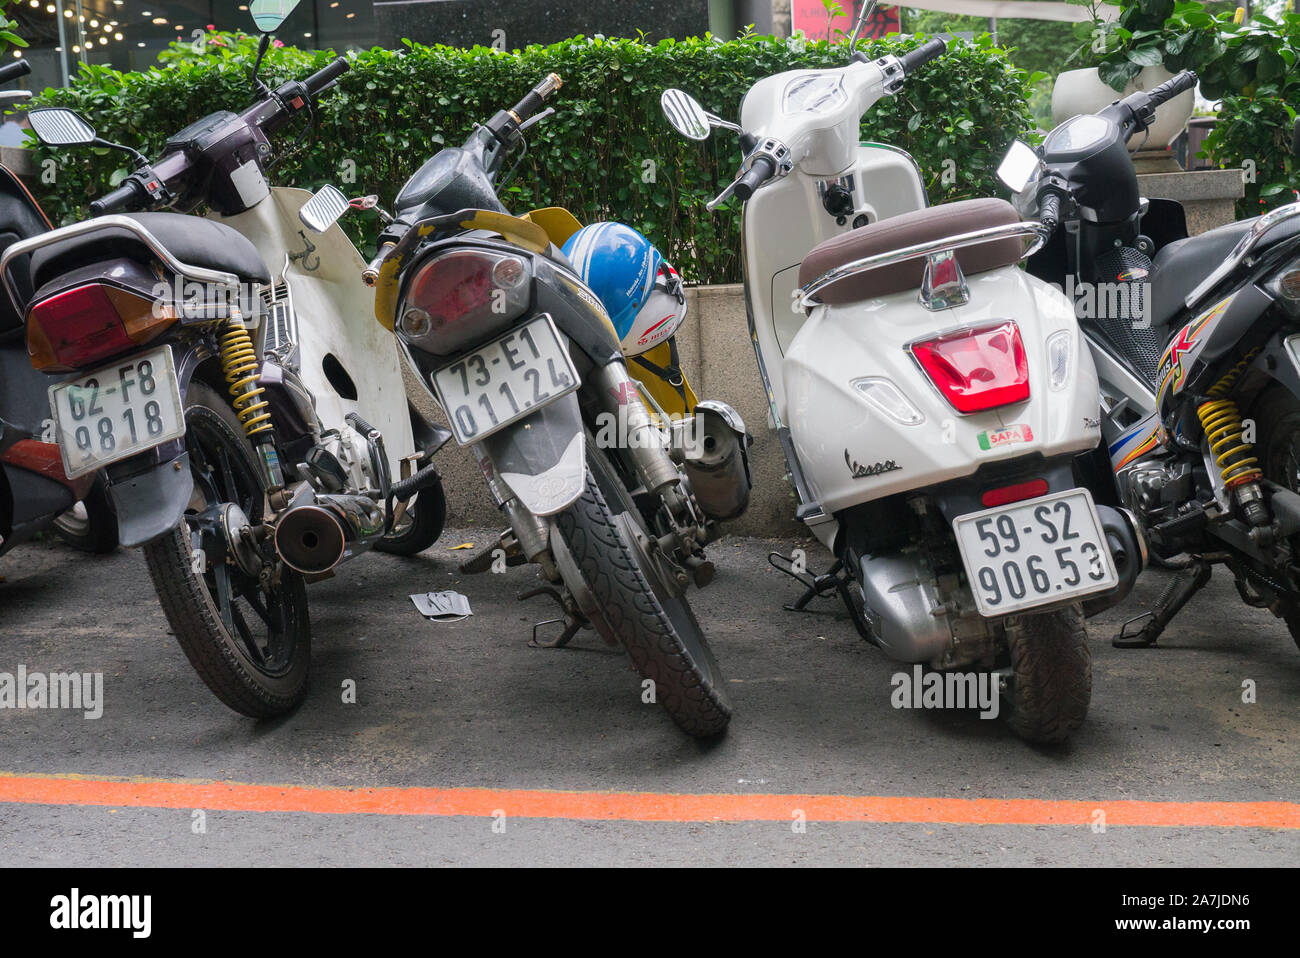 Horizontal image of parked scooters from behind showing license plates, taillights and worn tires. Stock Photo